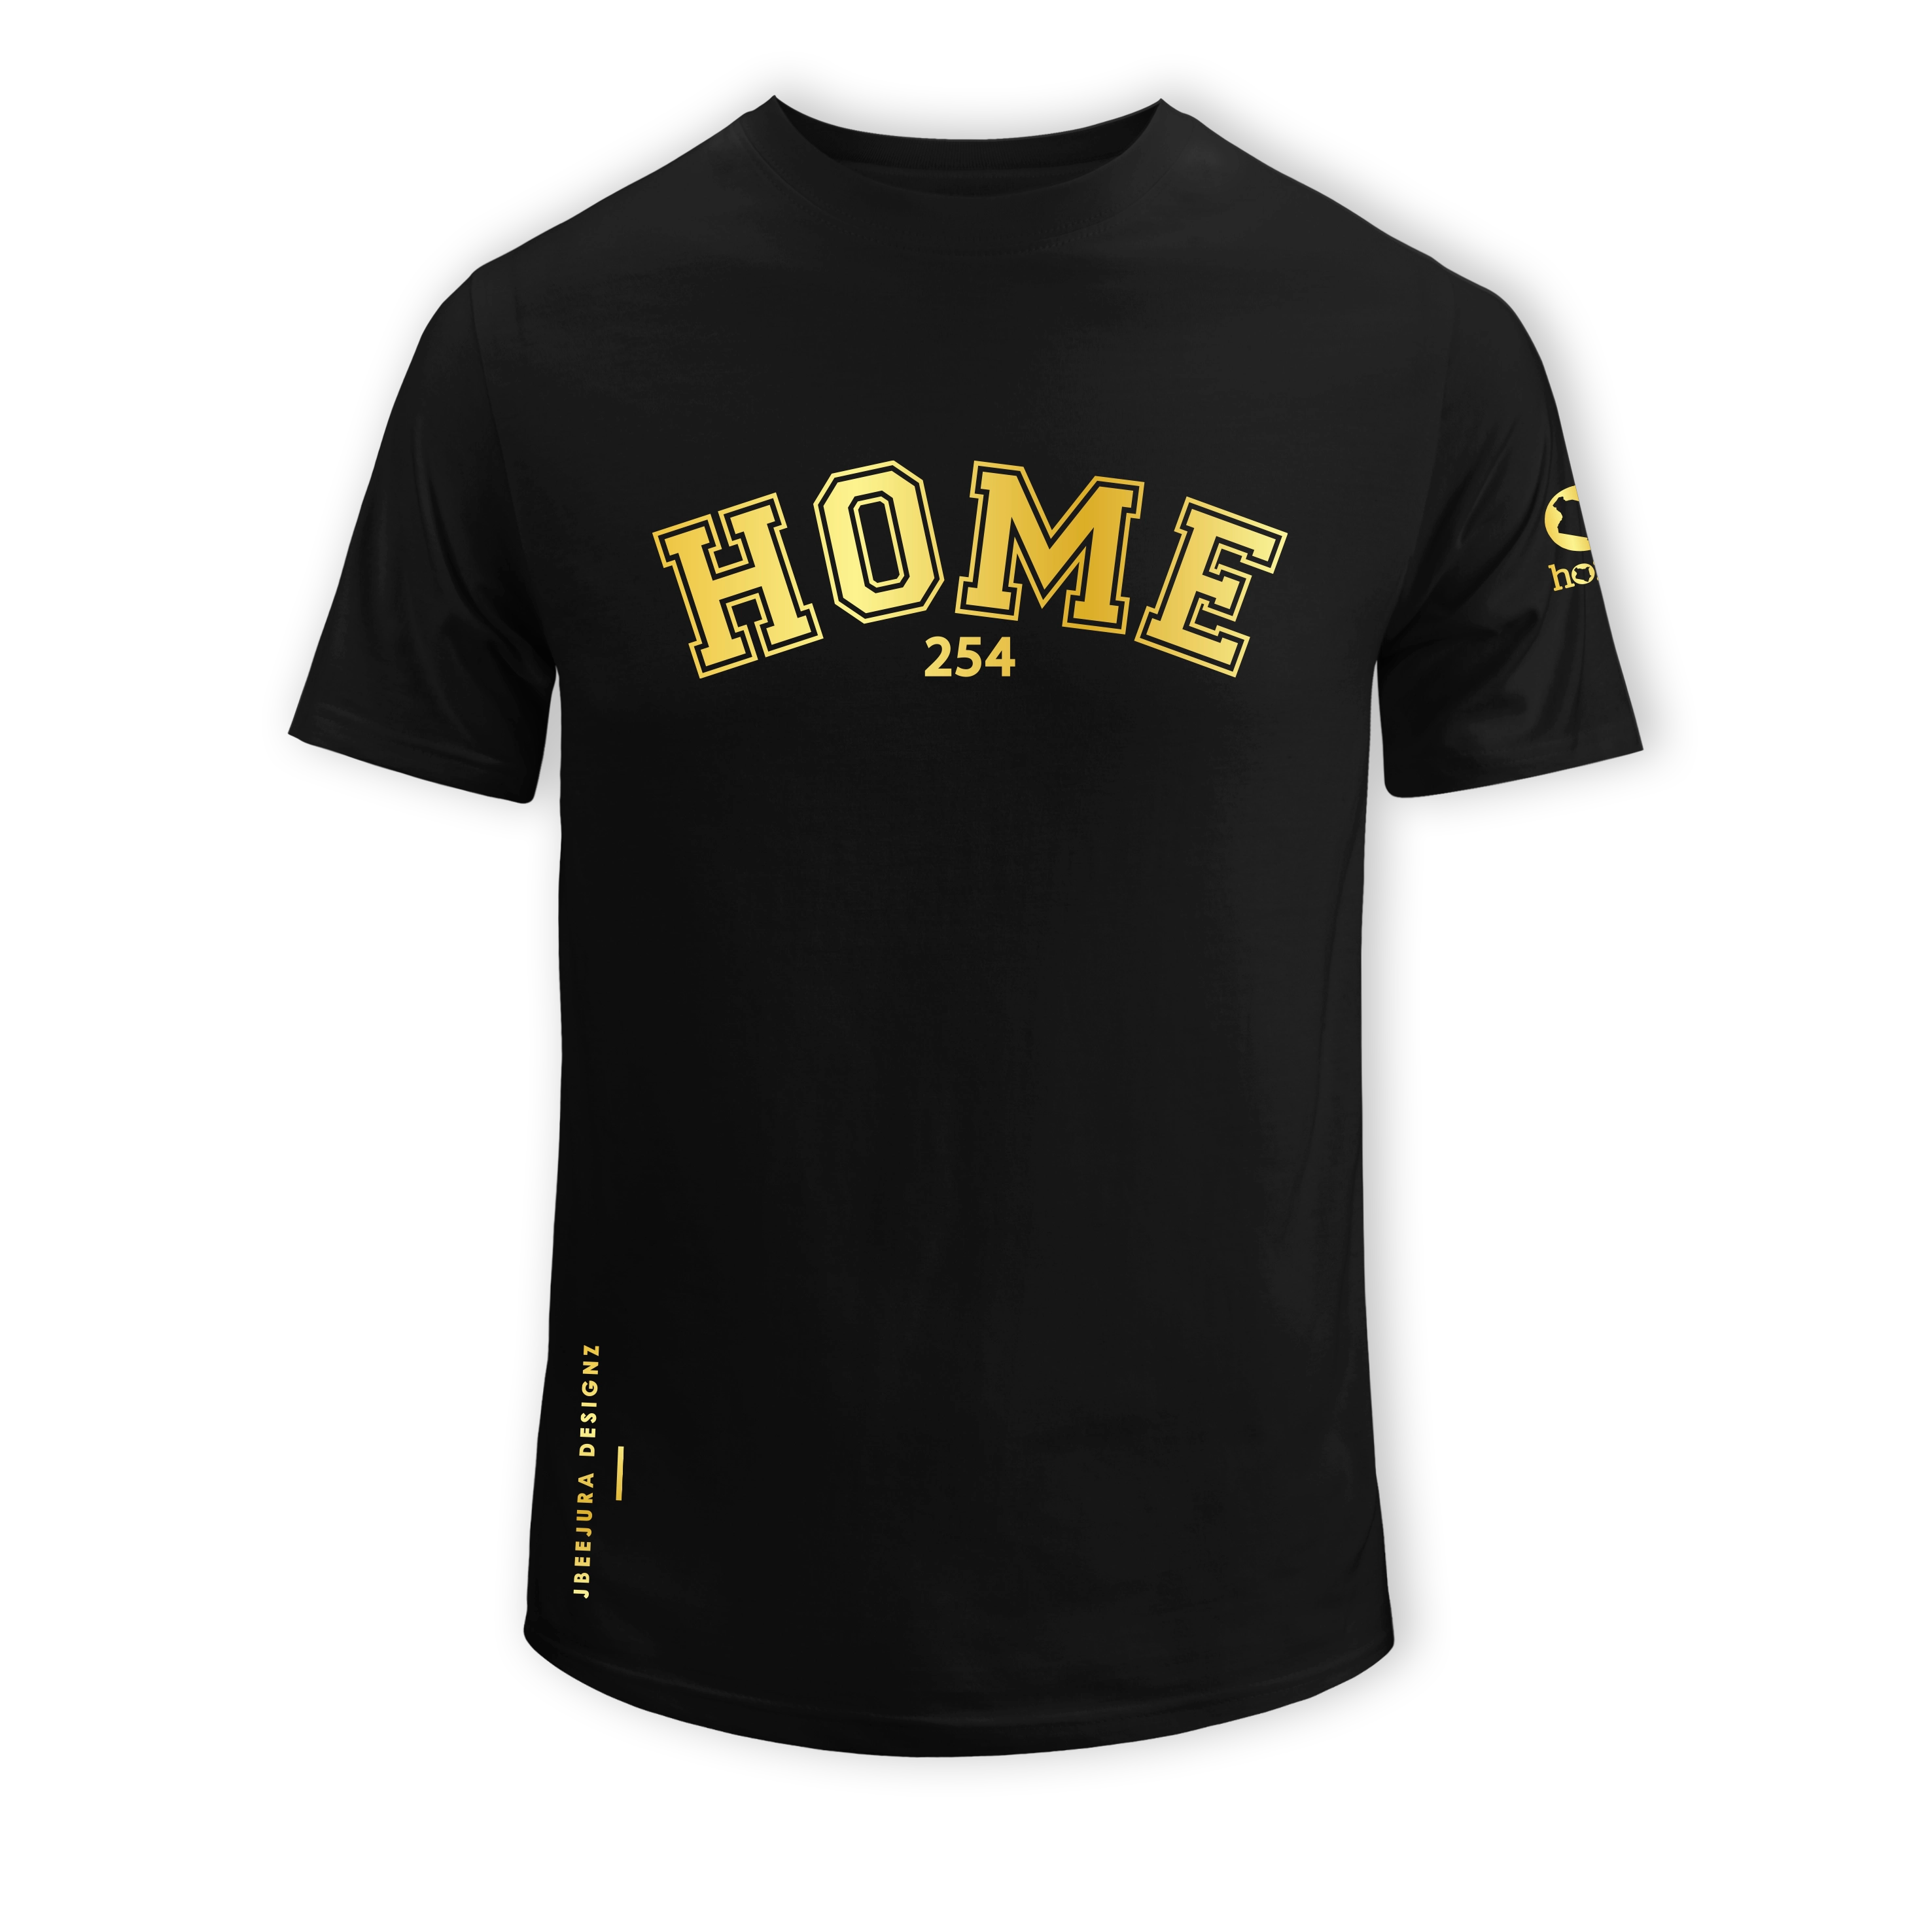 home_254 SHORT-SLEEVED BLACK T-SHIRT WITH A GOLD COLLEGE PRINT – COTTON PLUS FABRIC